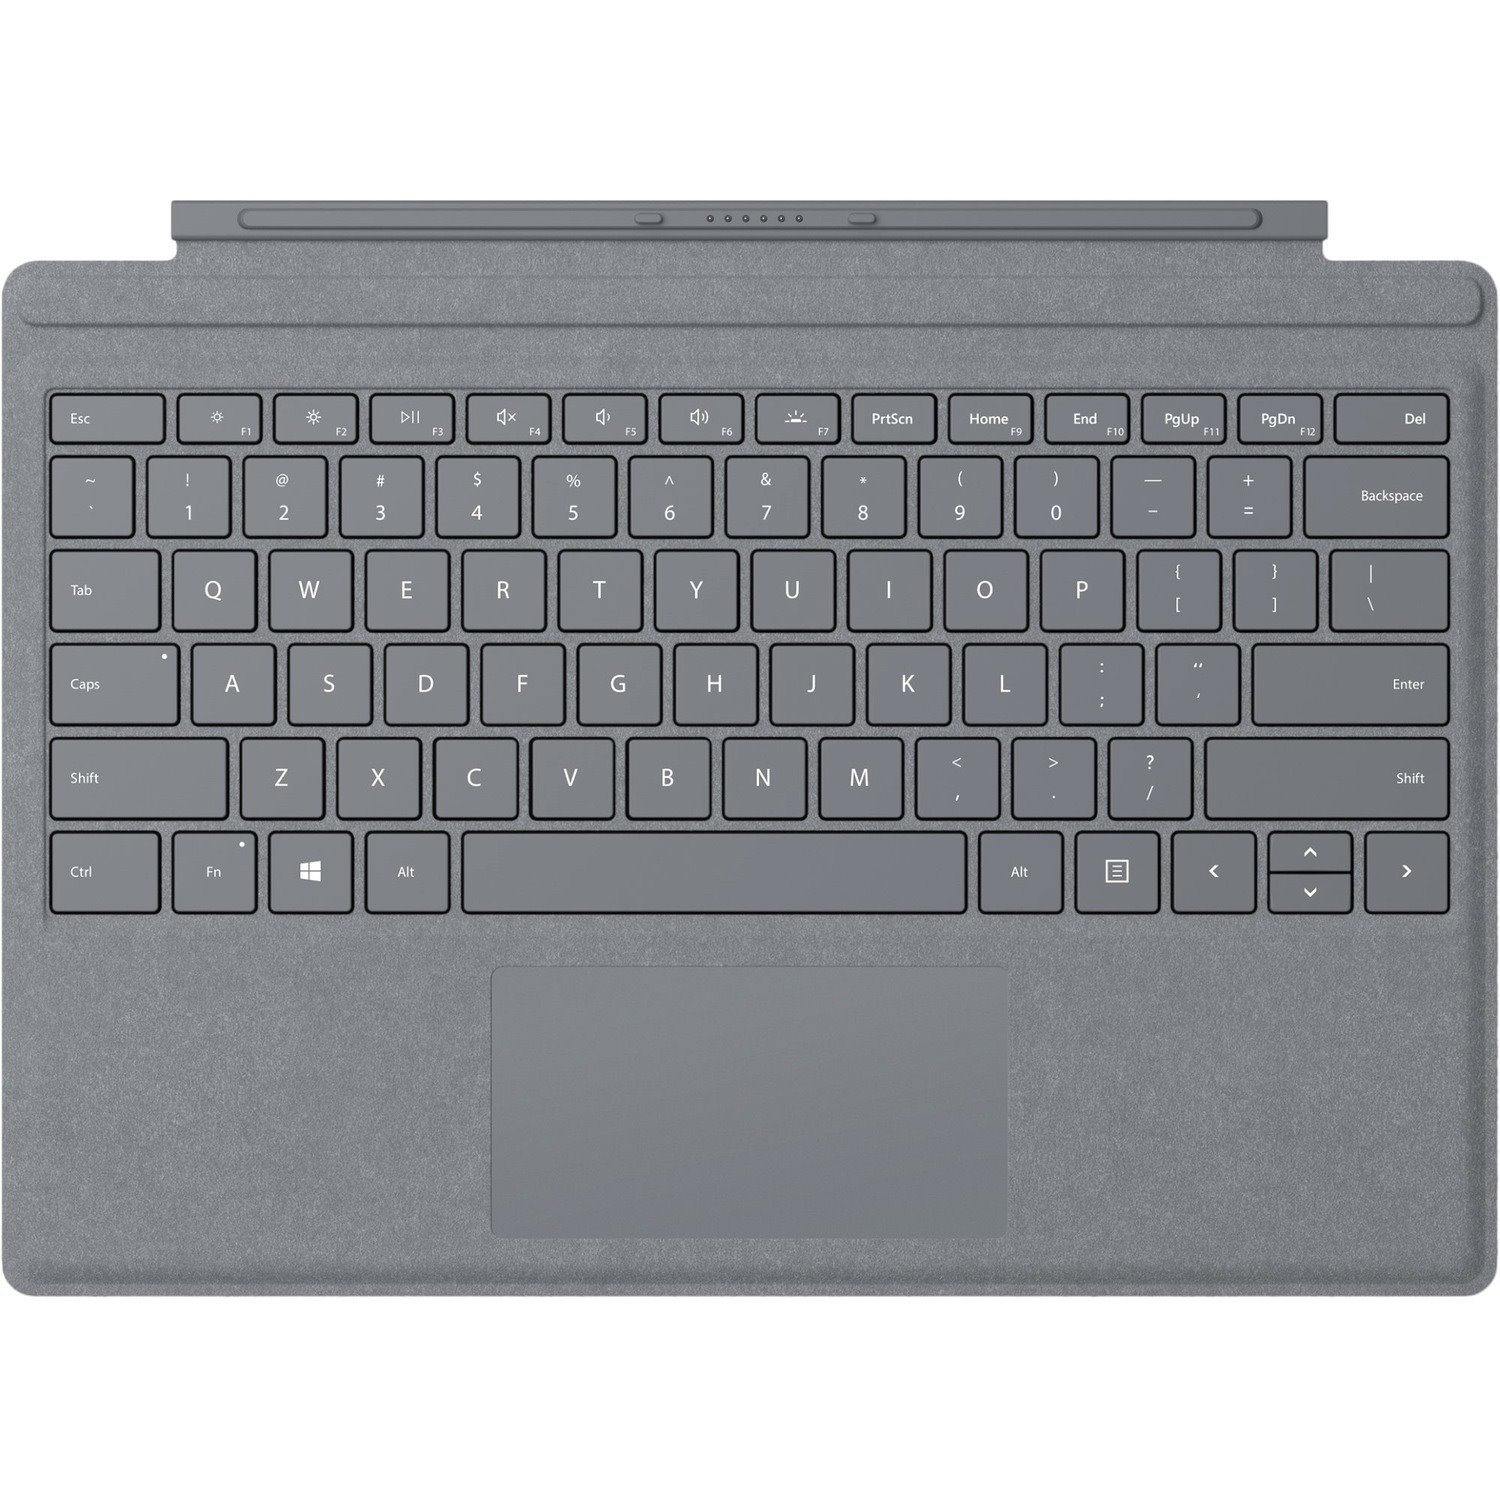 Microsoft Signature Type Cover Keyboard/Cover Case Microsoft Surface Pro 3, Surface Pro 4, Surface Pro 6, Surface Pro, Surface Pro 7 Tablet - Platinum